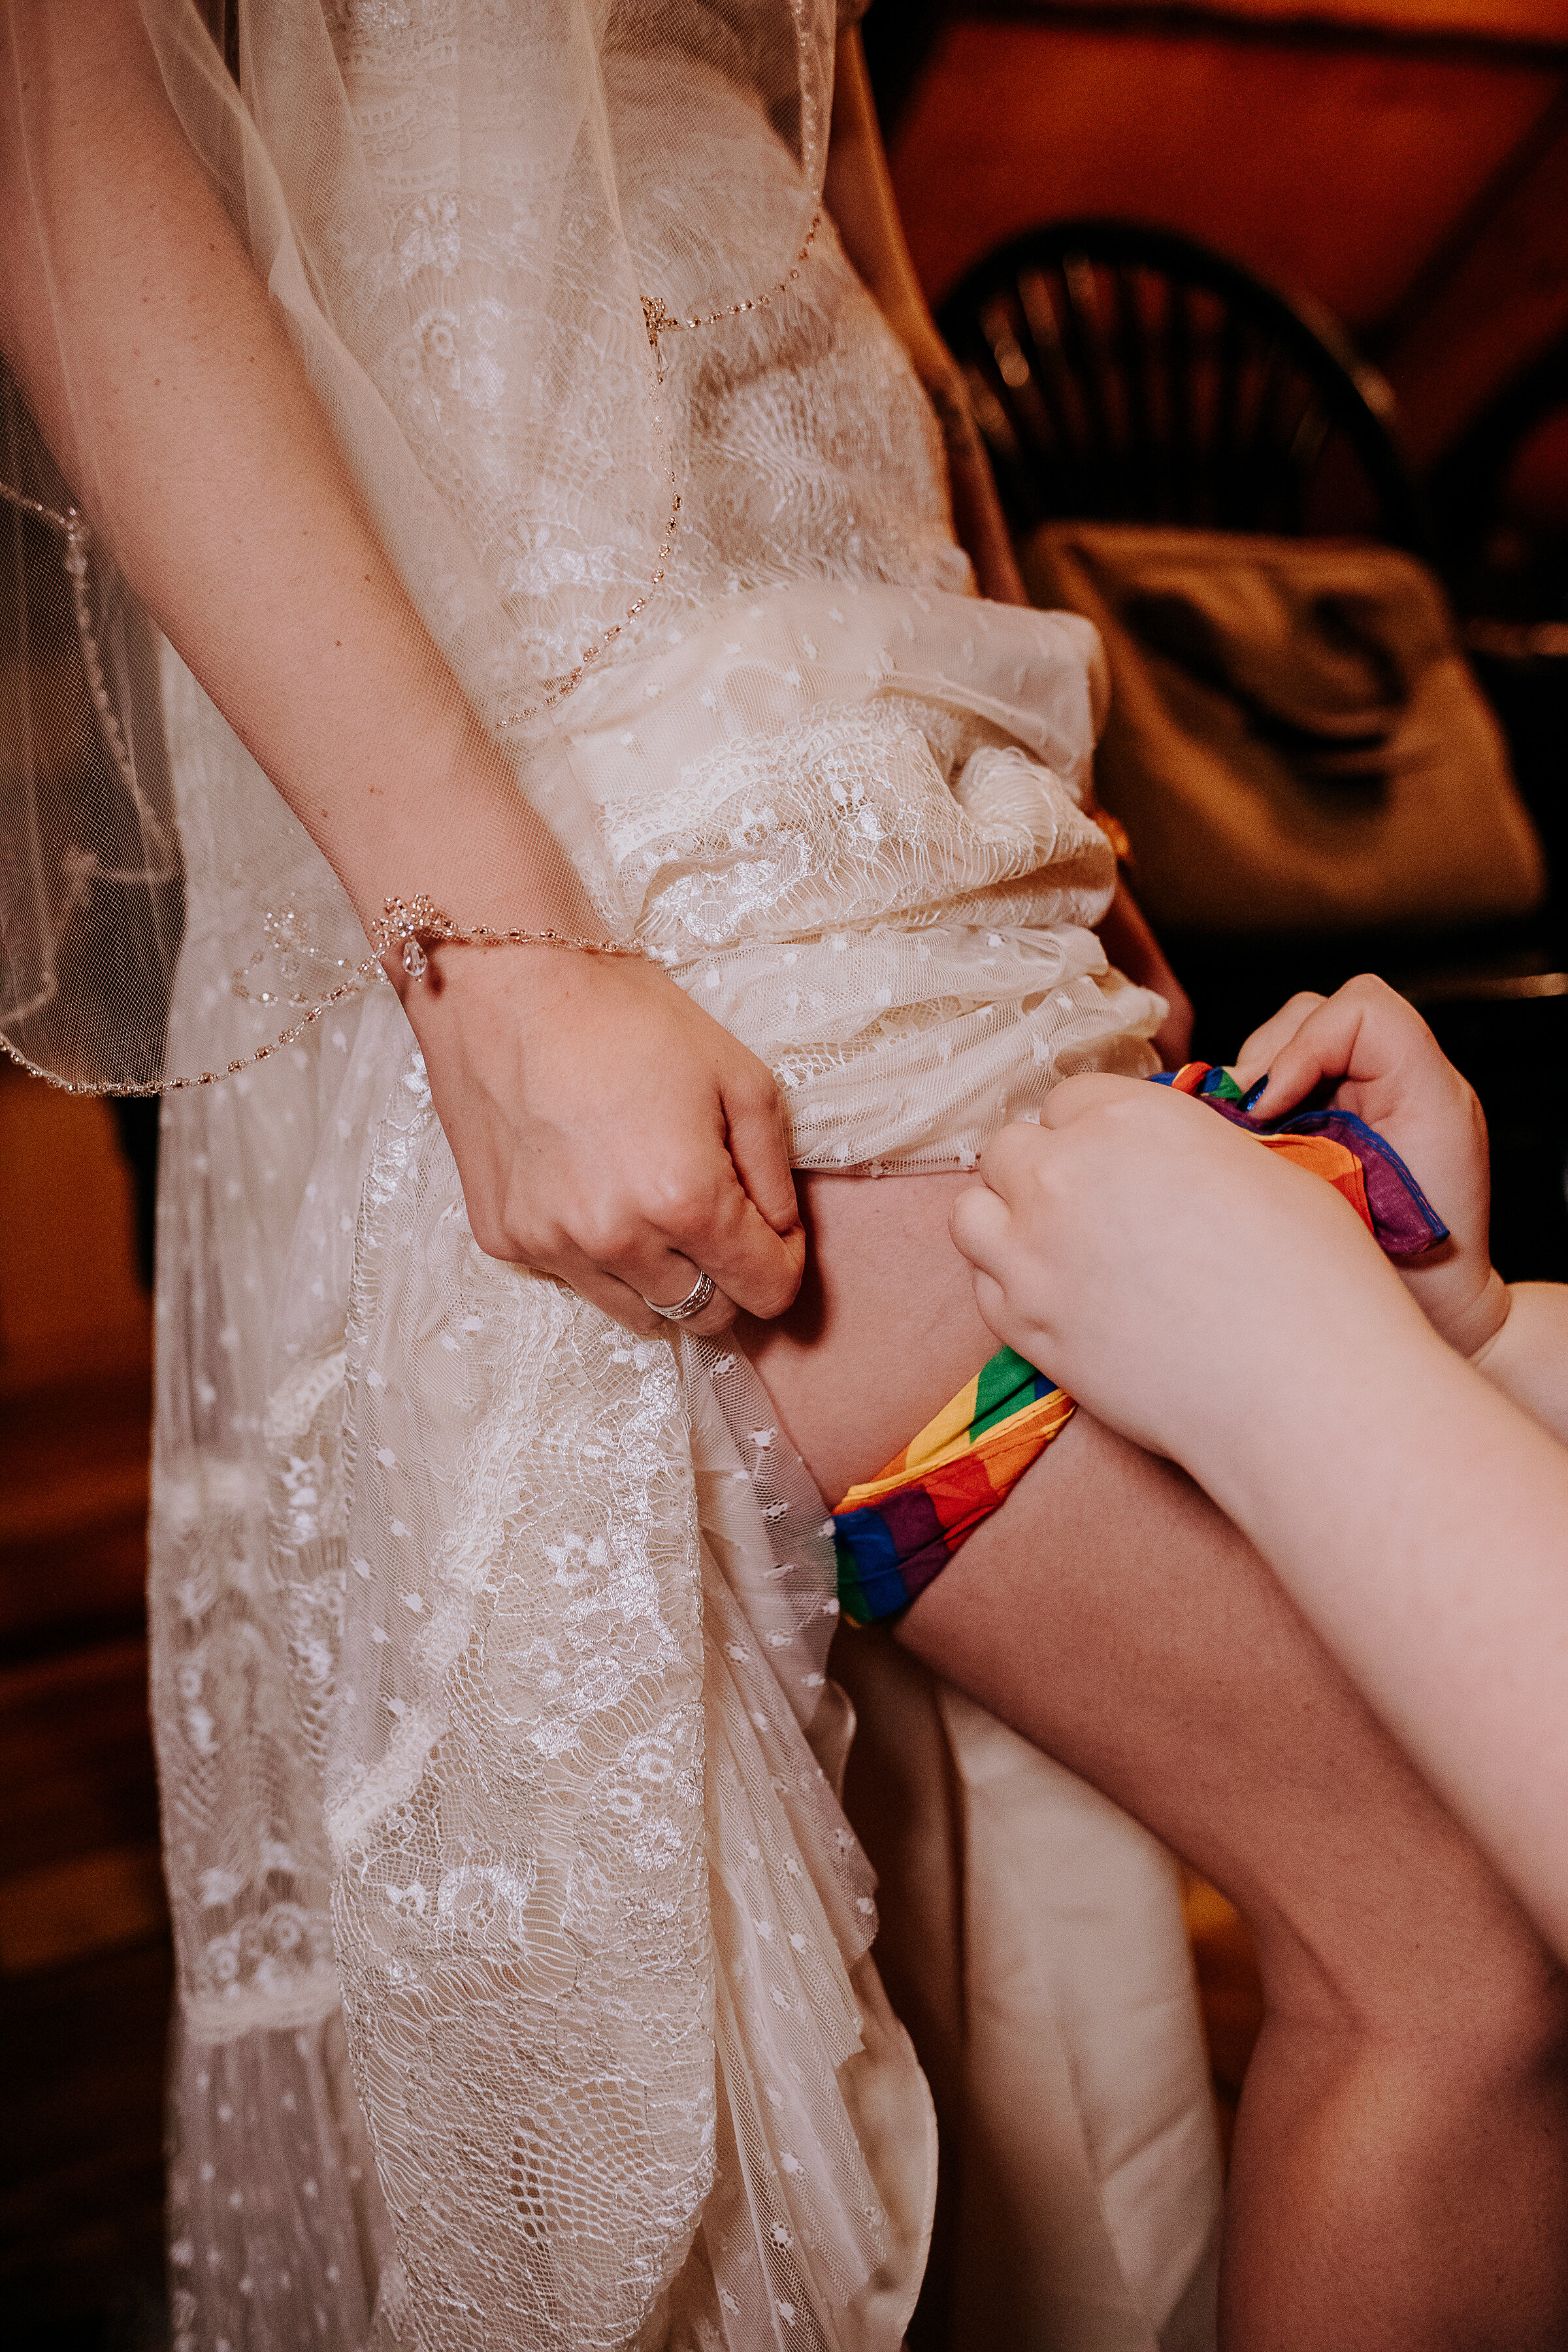  Kindred + Co. Photography captures authentic celebratory moments as groom removes his bride’s garter in this unique treehouse wedding elopement at the Mohicans. rainbow garter, lace bohemian wedding dress, beaded waist length bridal veil, candid cel